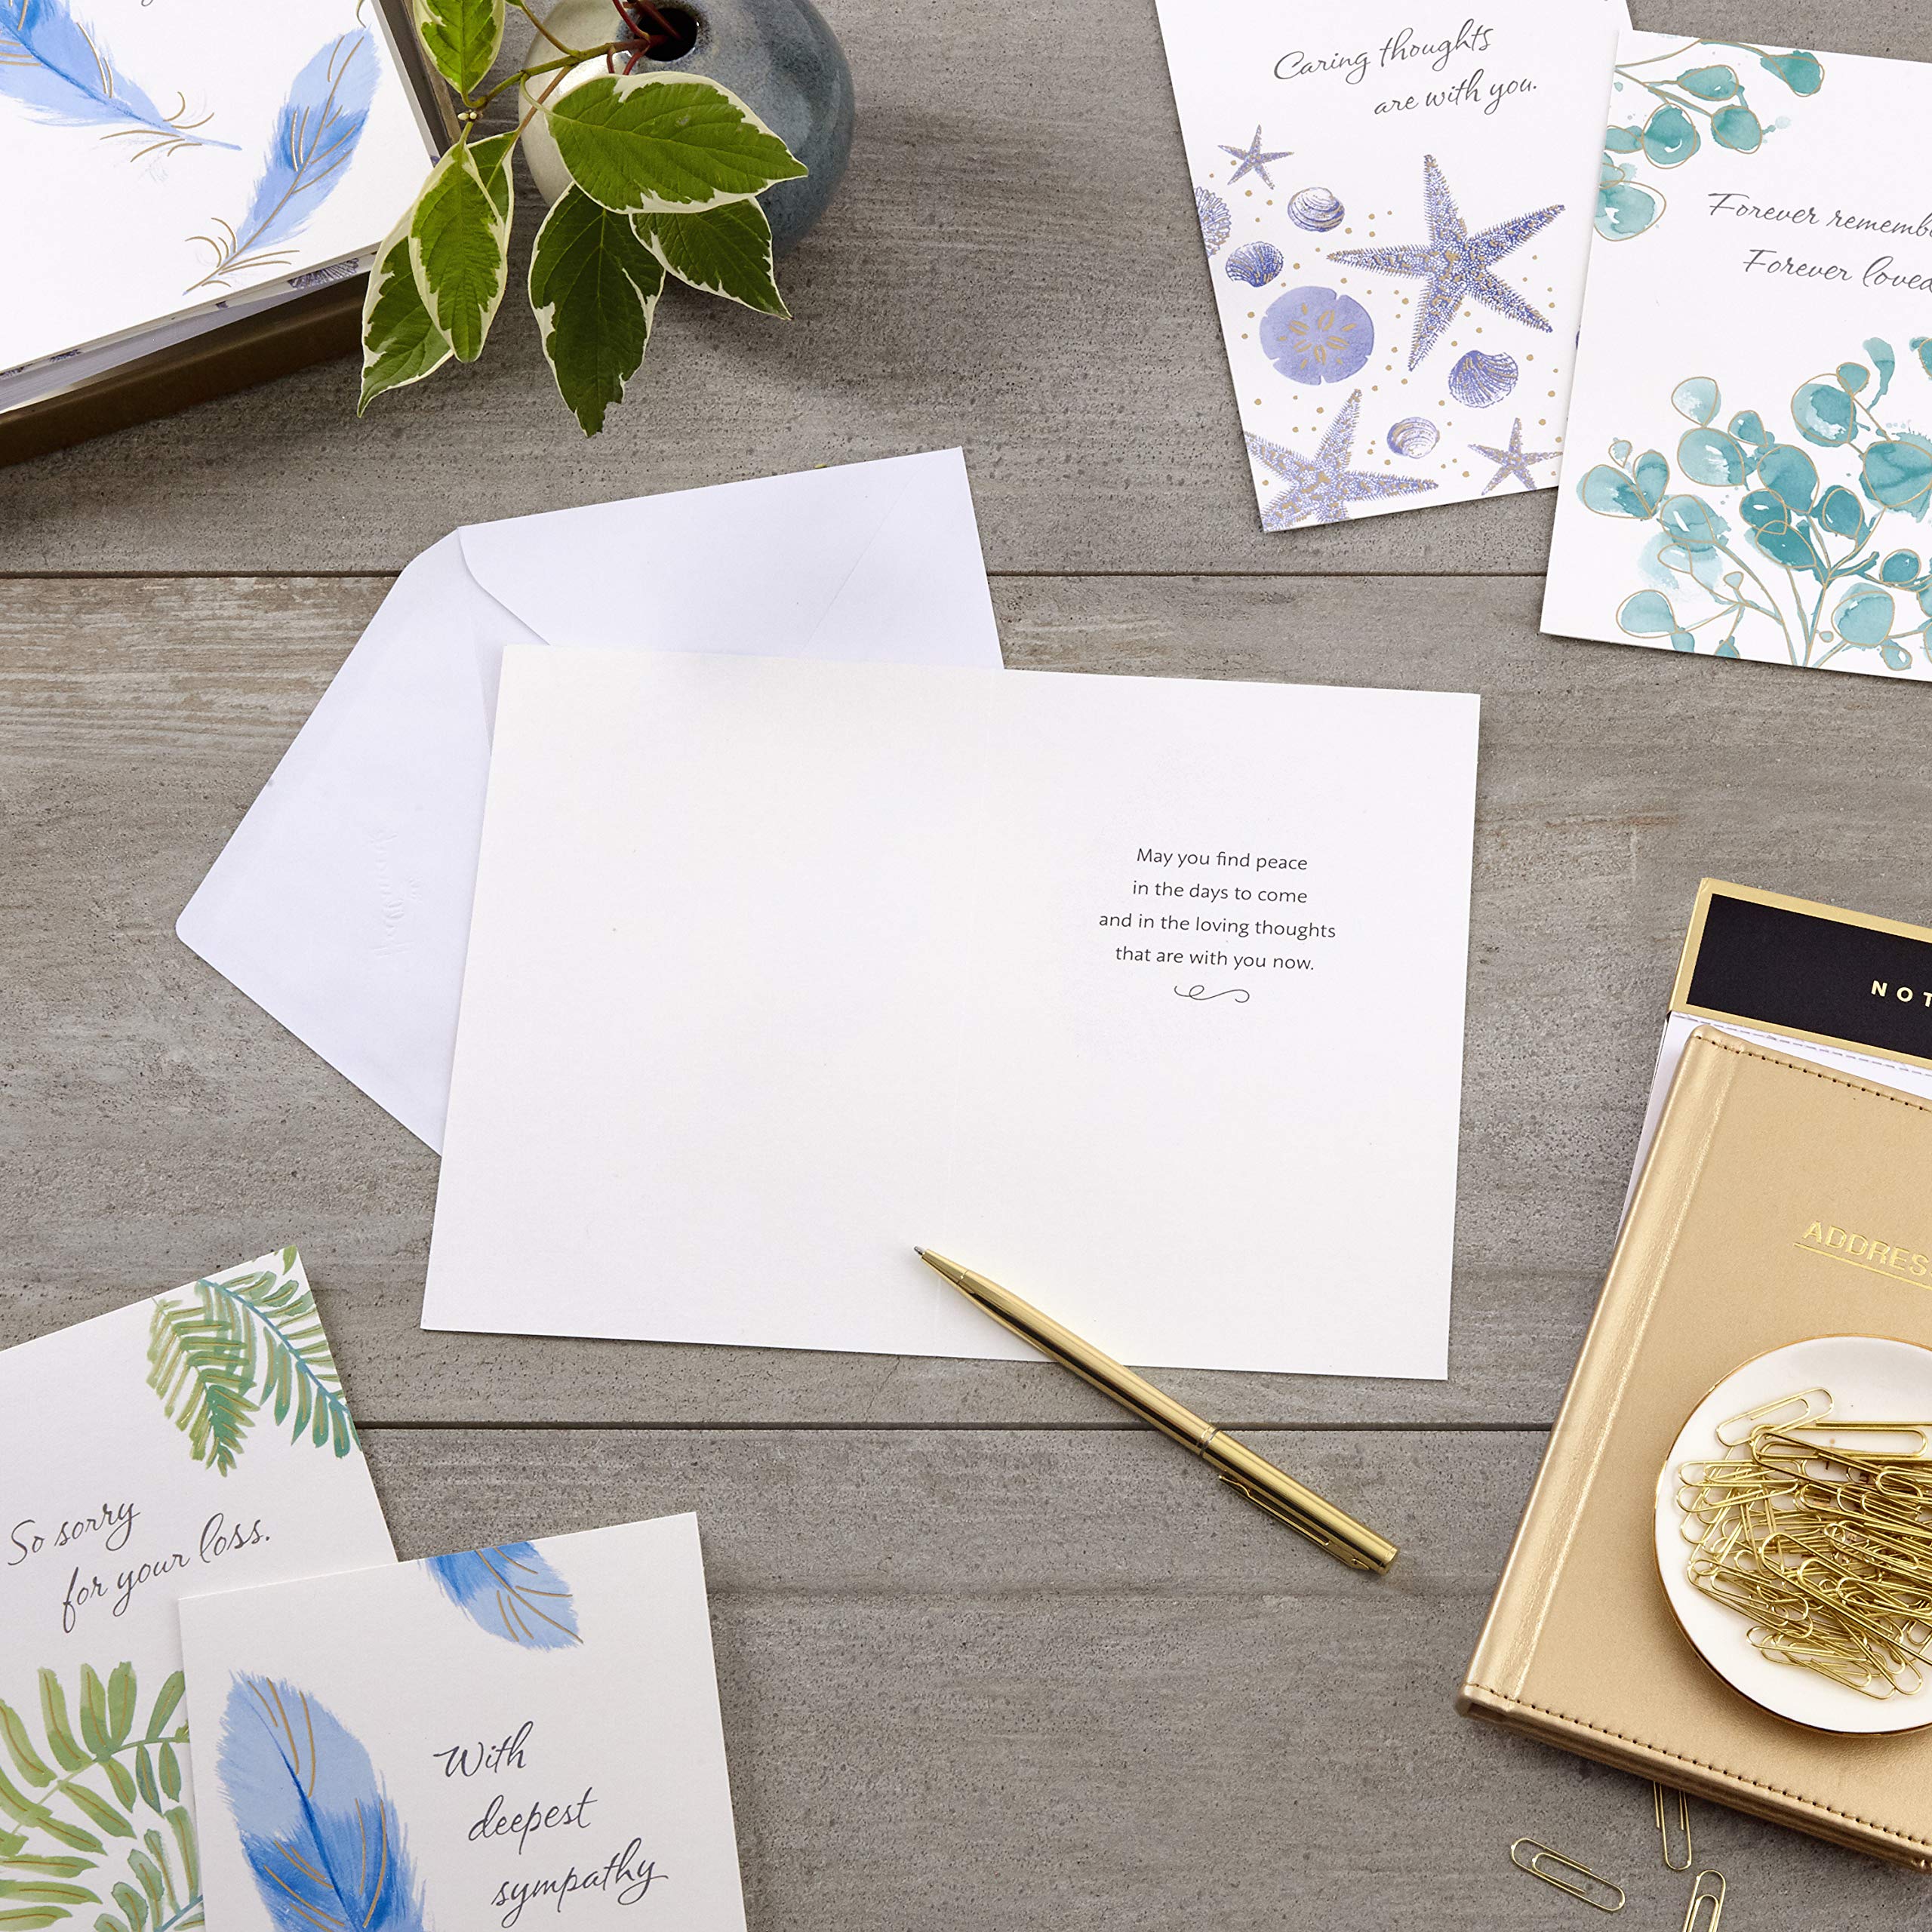 Hallmark Sympathy Cards Assortment, Watercolor Nature (12 Assorted Thinking of You Cards with Envelopes)